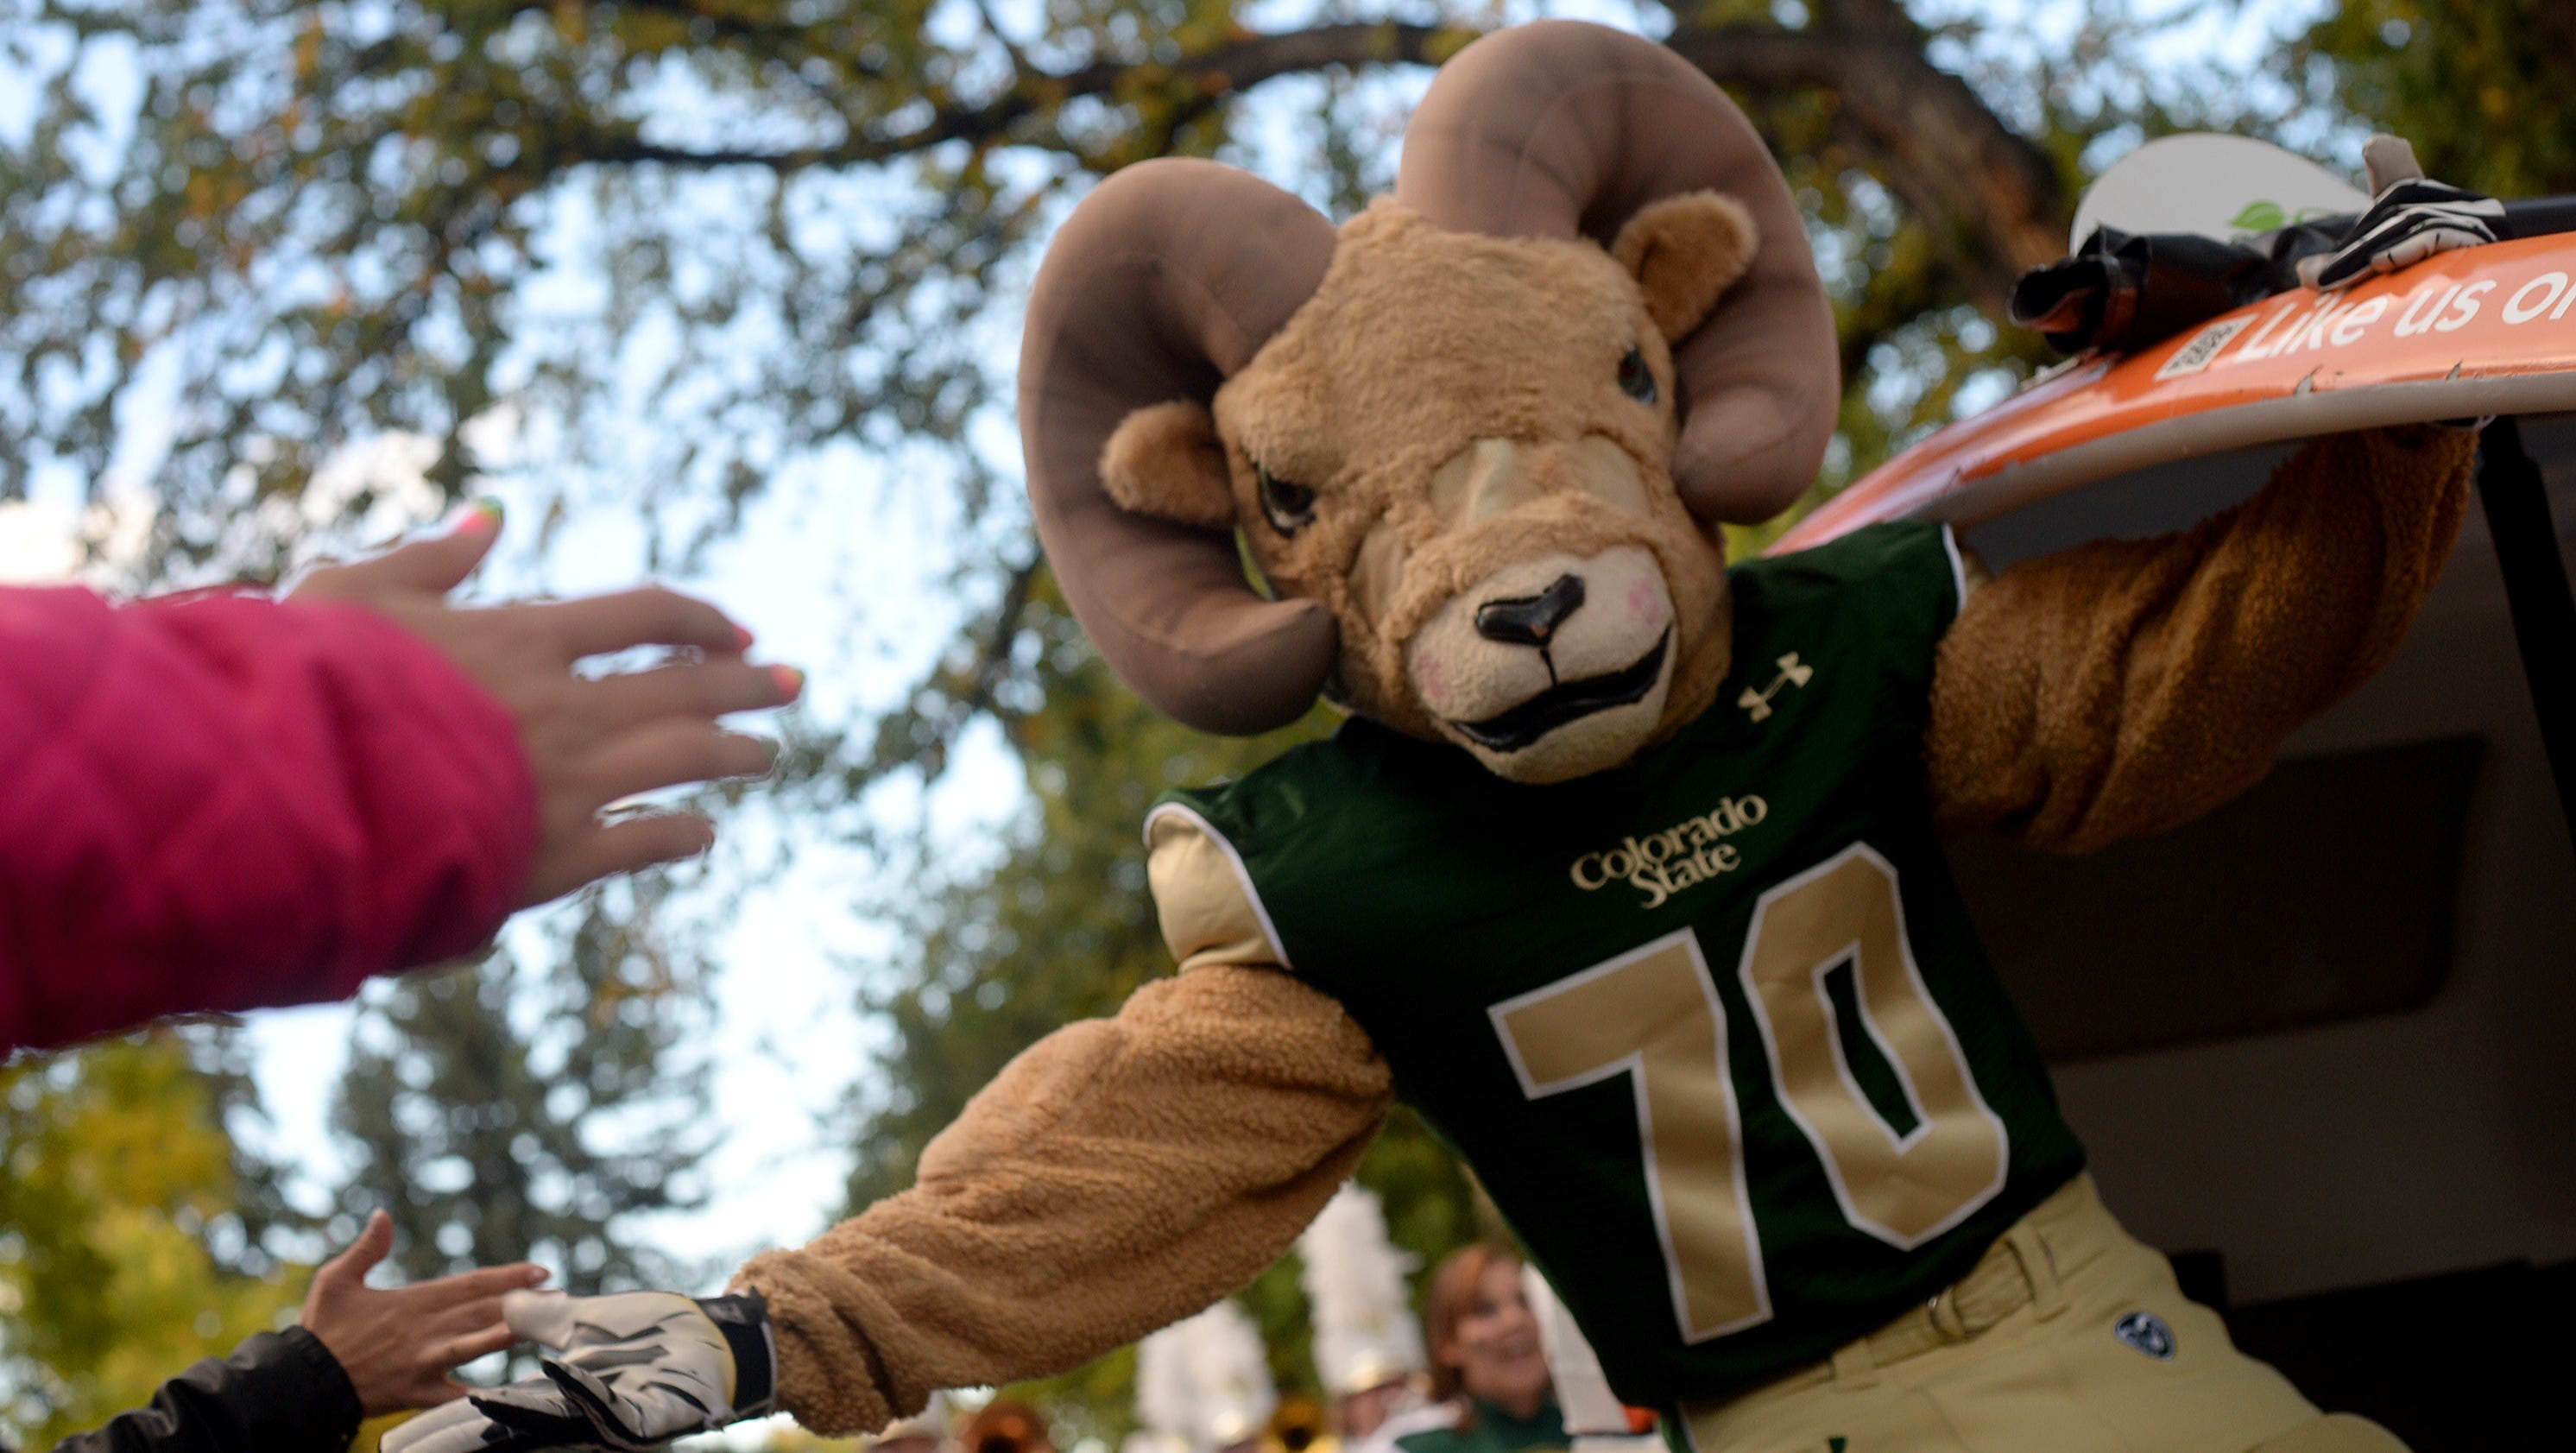 These college sports mascots will haunt your dreams